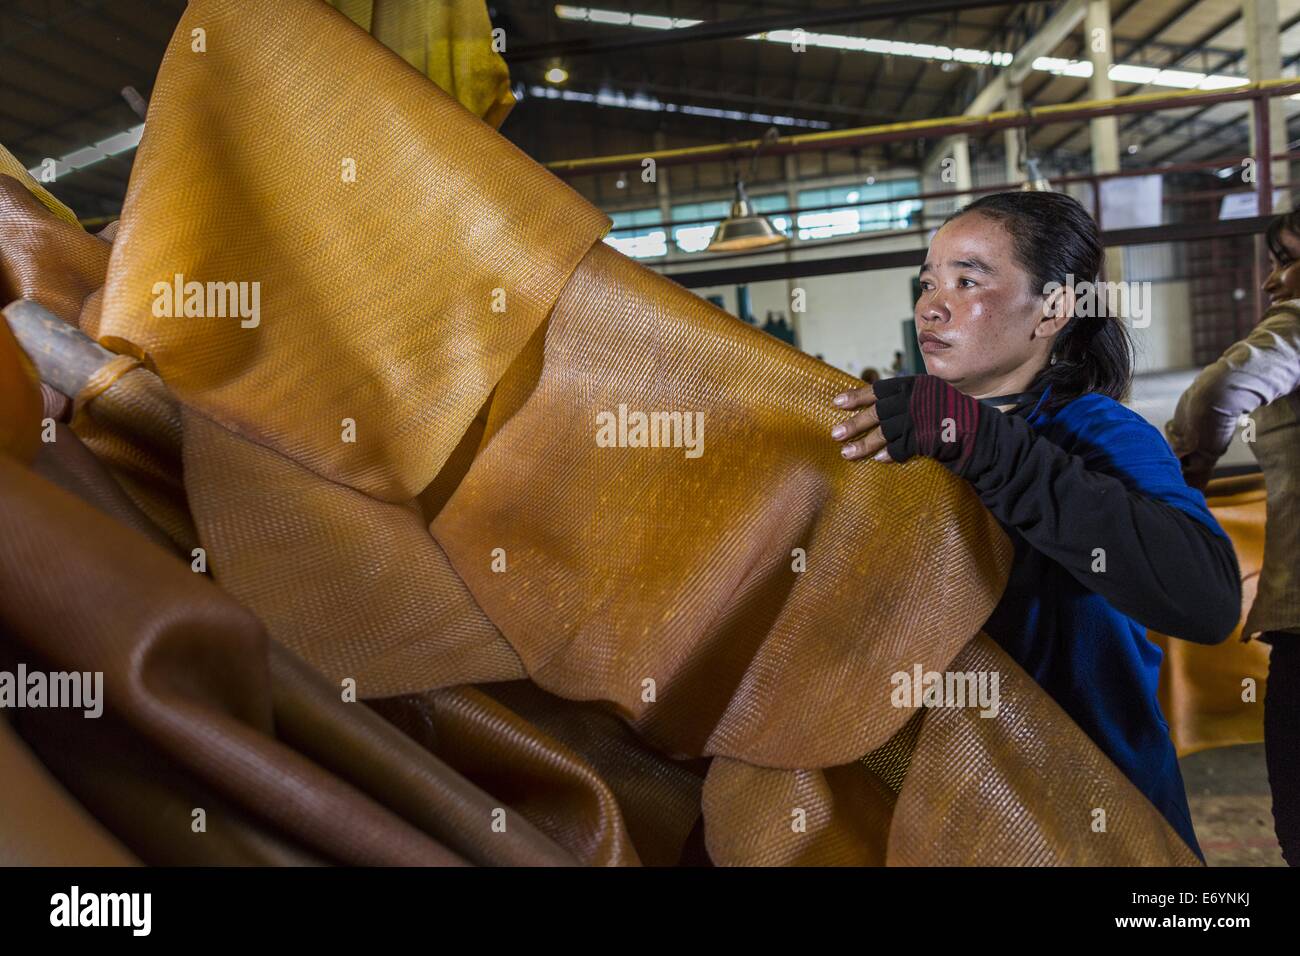 Sept. 2, 2014 - Bo Thong, Chonburi, Thailand - A worker at Bothong Rubber Fund Cooperative in Bo Thong, Chonburi, Thailand, pulls rubber sheets off hangers after they were dried in a large smoker. Thailand is the leading rubber exporter in the world. In the last two years, the price paid to rubber farmers has plunged from approximately 190 Baht per kilo (about $6.10 US) to 52 Baht per kilo (about $1.60 US). It costs about 65 Baht per kilo to produce rubber ($2.05 US). A rubber farmer in southern Thailand committed suicide over the weekend, allegedly because the low prices meant he couldn't pro Stock Photo